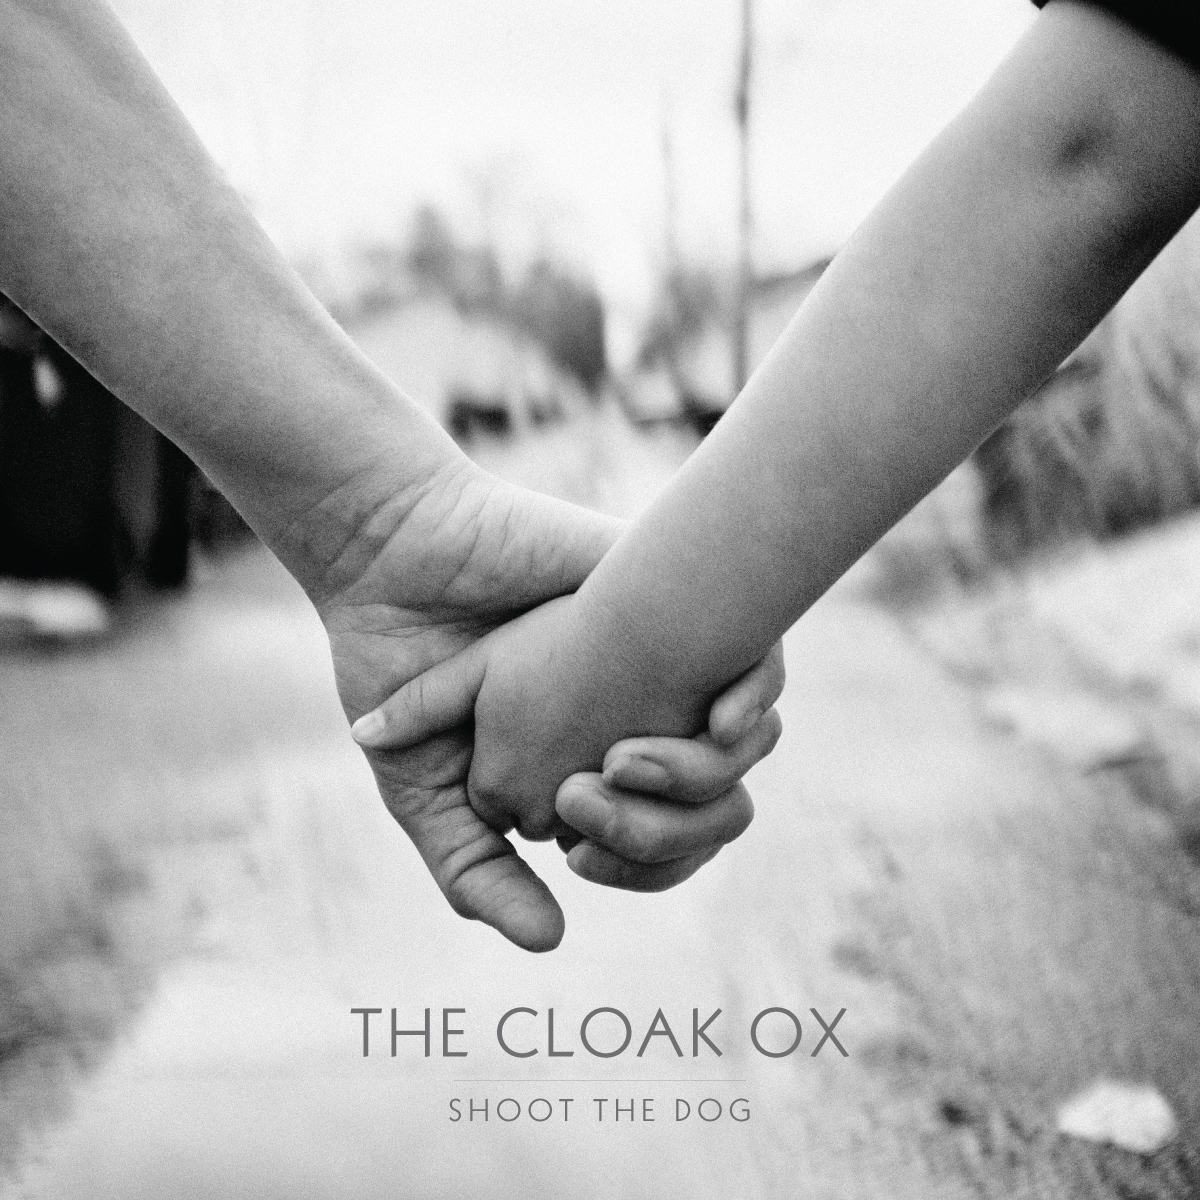 Believe This Hype: The Cloak Ox’s Stunning Debut